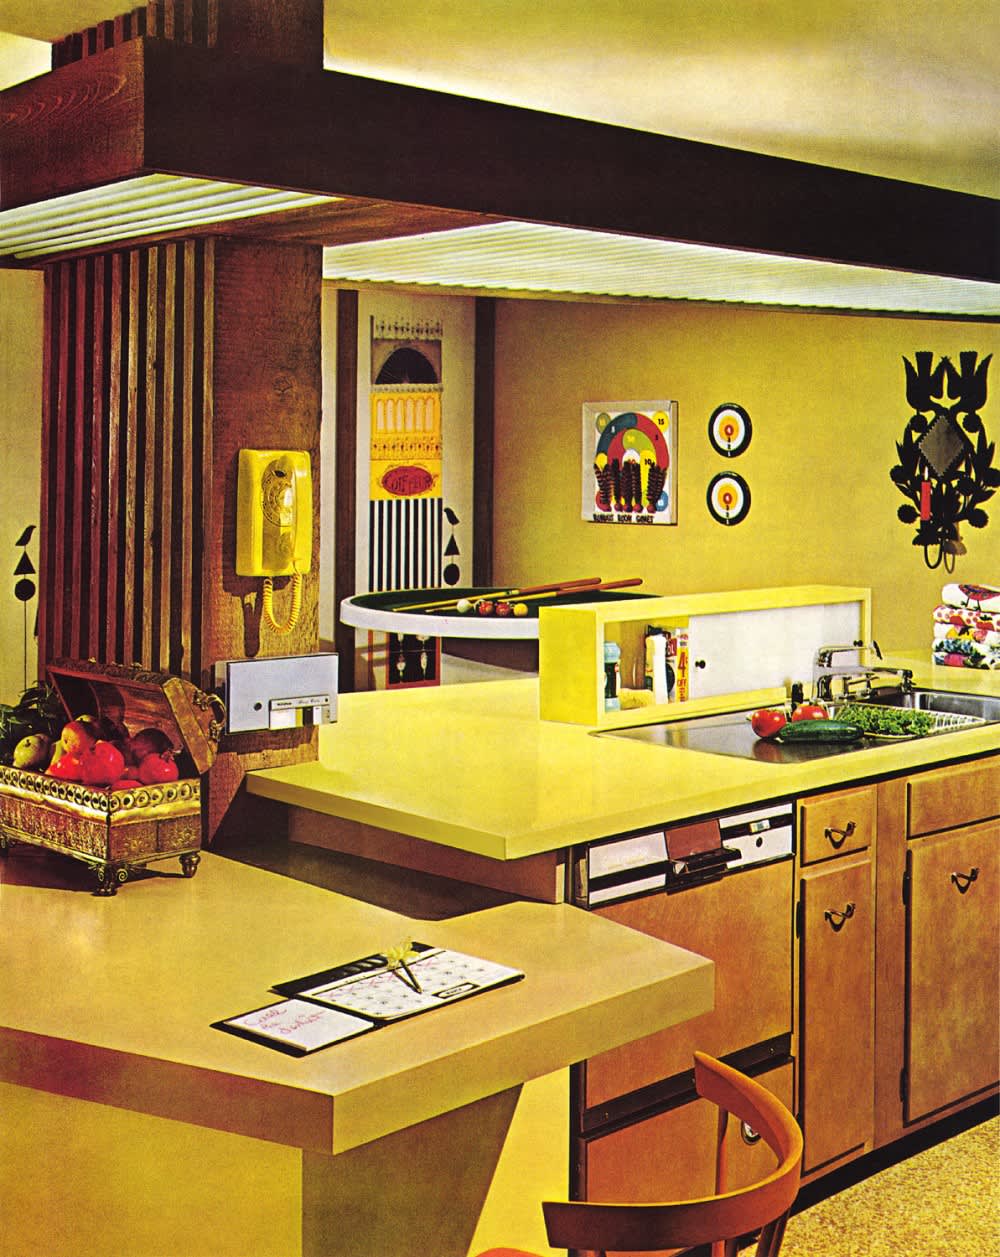 a brief history of 1970s kitchen design | apartment therapy